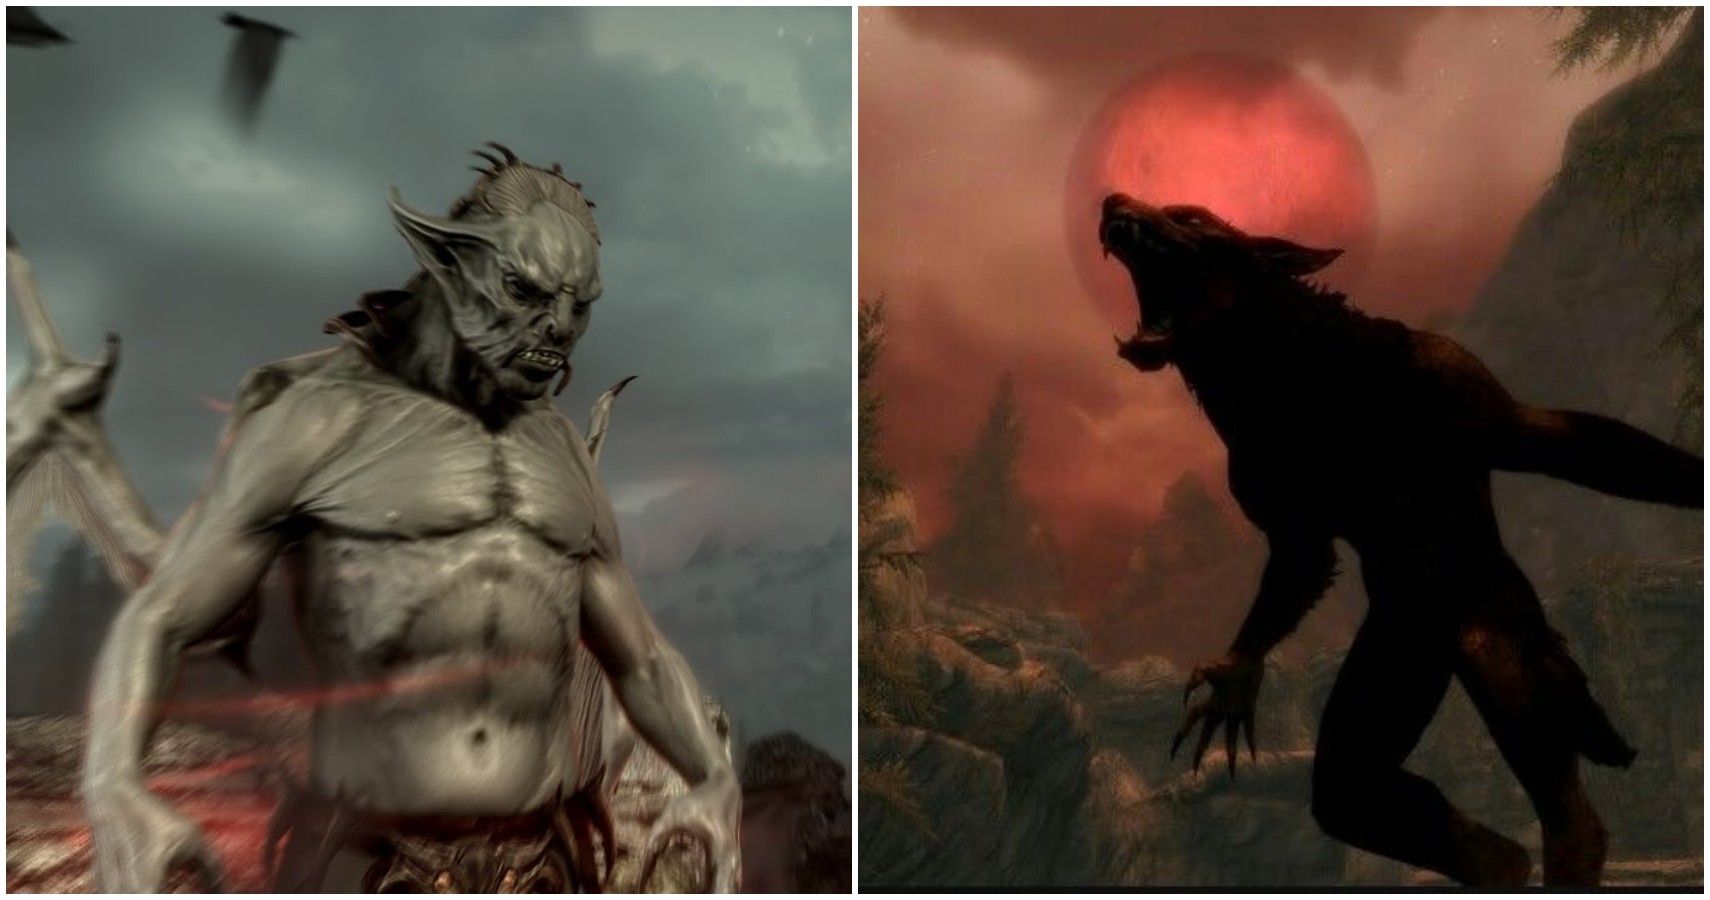 Is Vampire Lord or werewolf better?